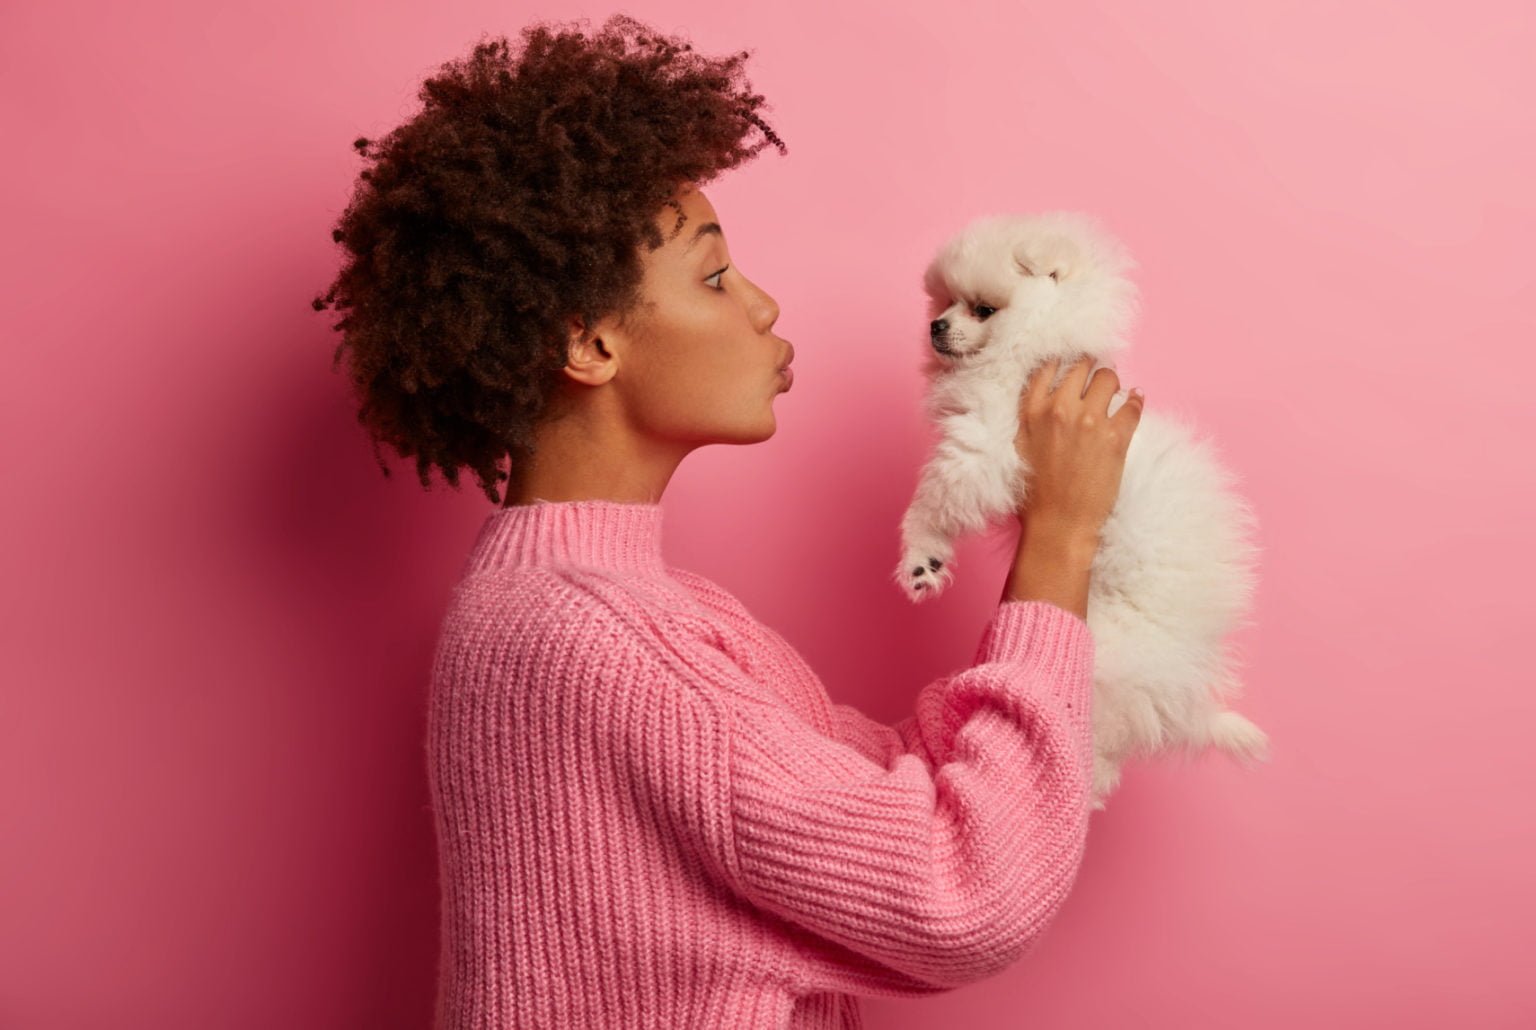 Profile shot of Afro American woman kisses breed dog, raises in hands, wears knitted sweater, poses